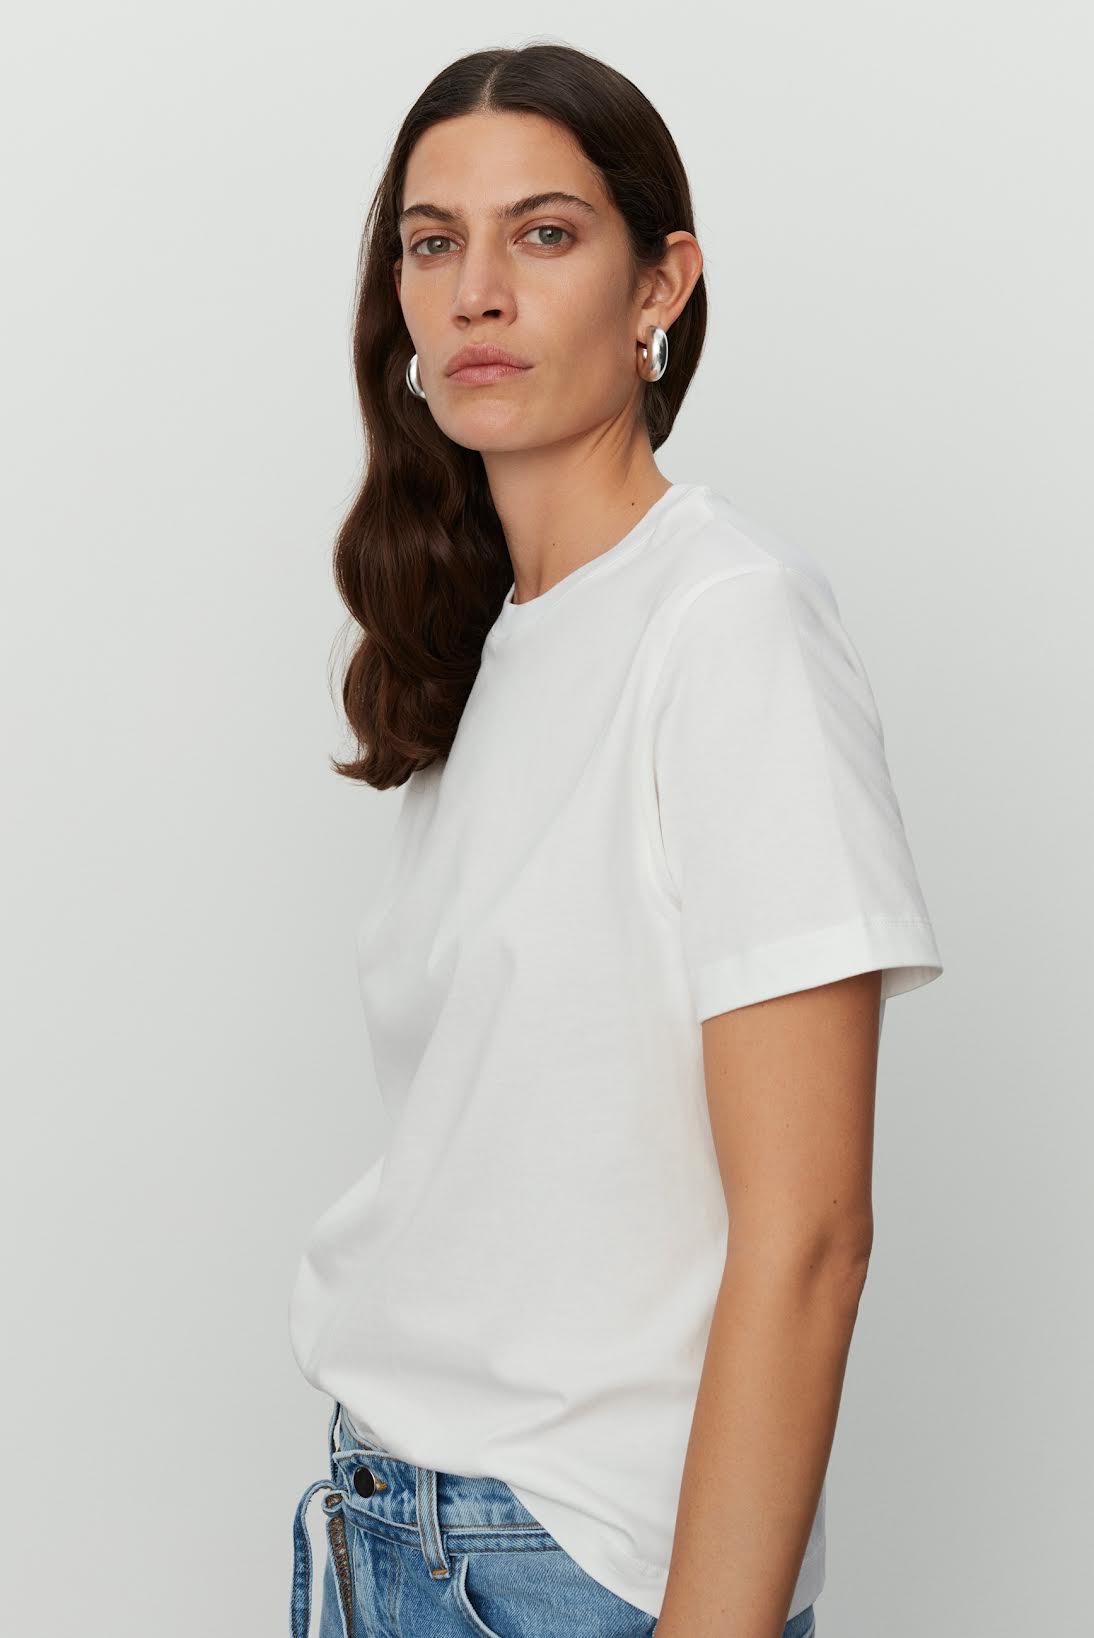 DAY BIRGER - Parry White Relaxed T-Shirt - 32 The Guild